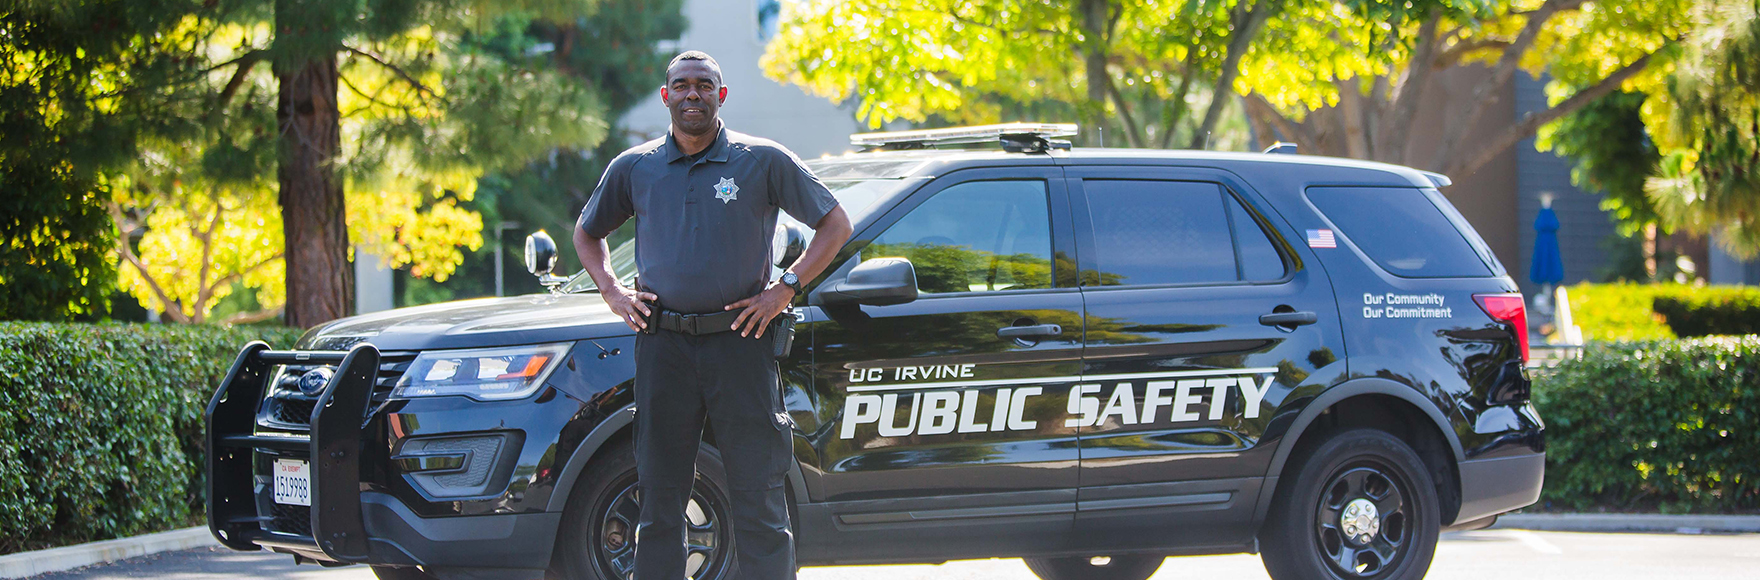 Public Safety Responder smiling in front of car